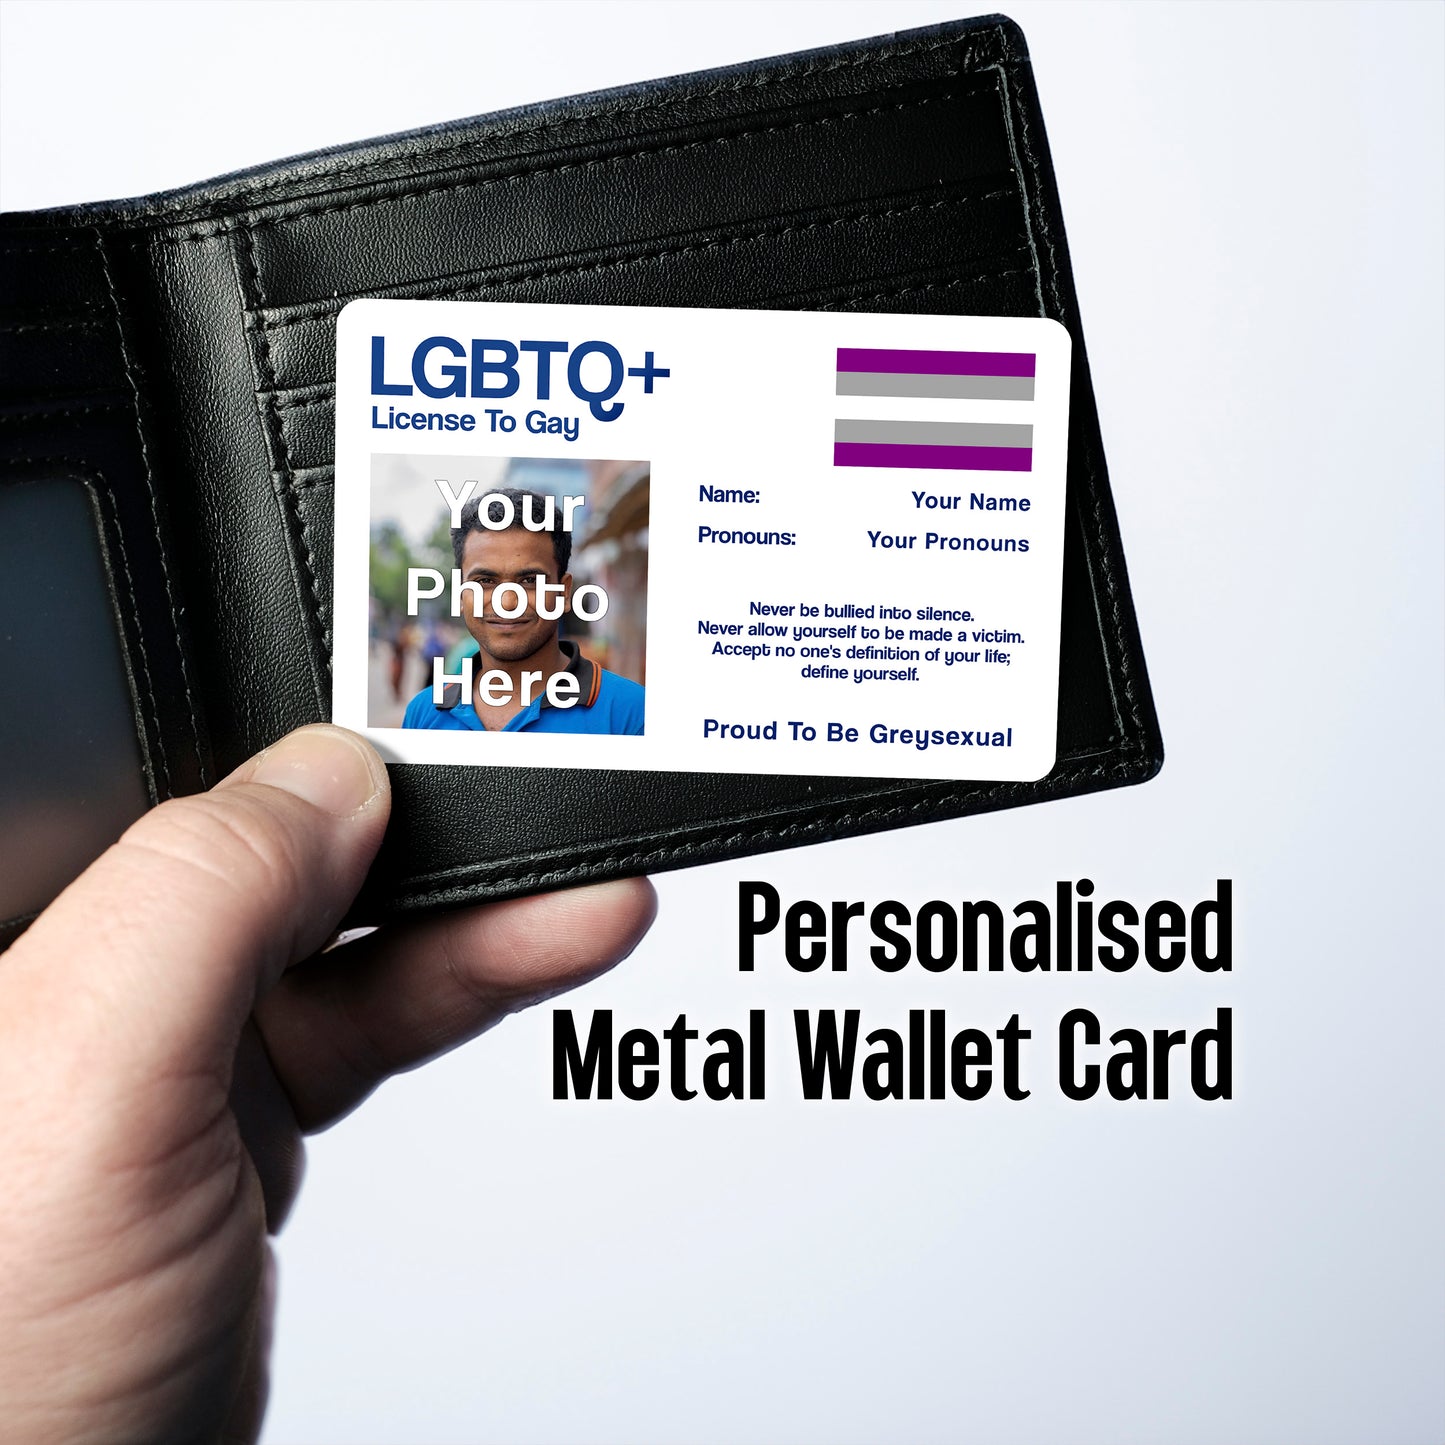 Greysexual license to gay aluminium wallet card personalised with your name, pronouns and photo